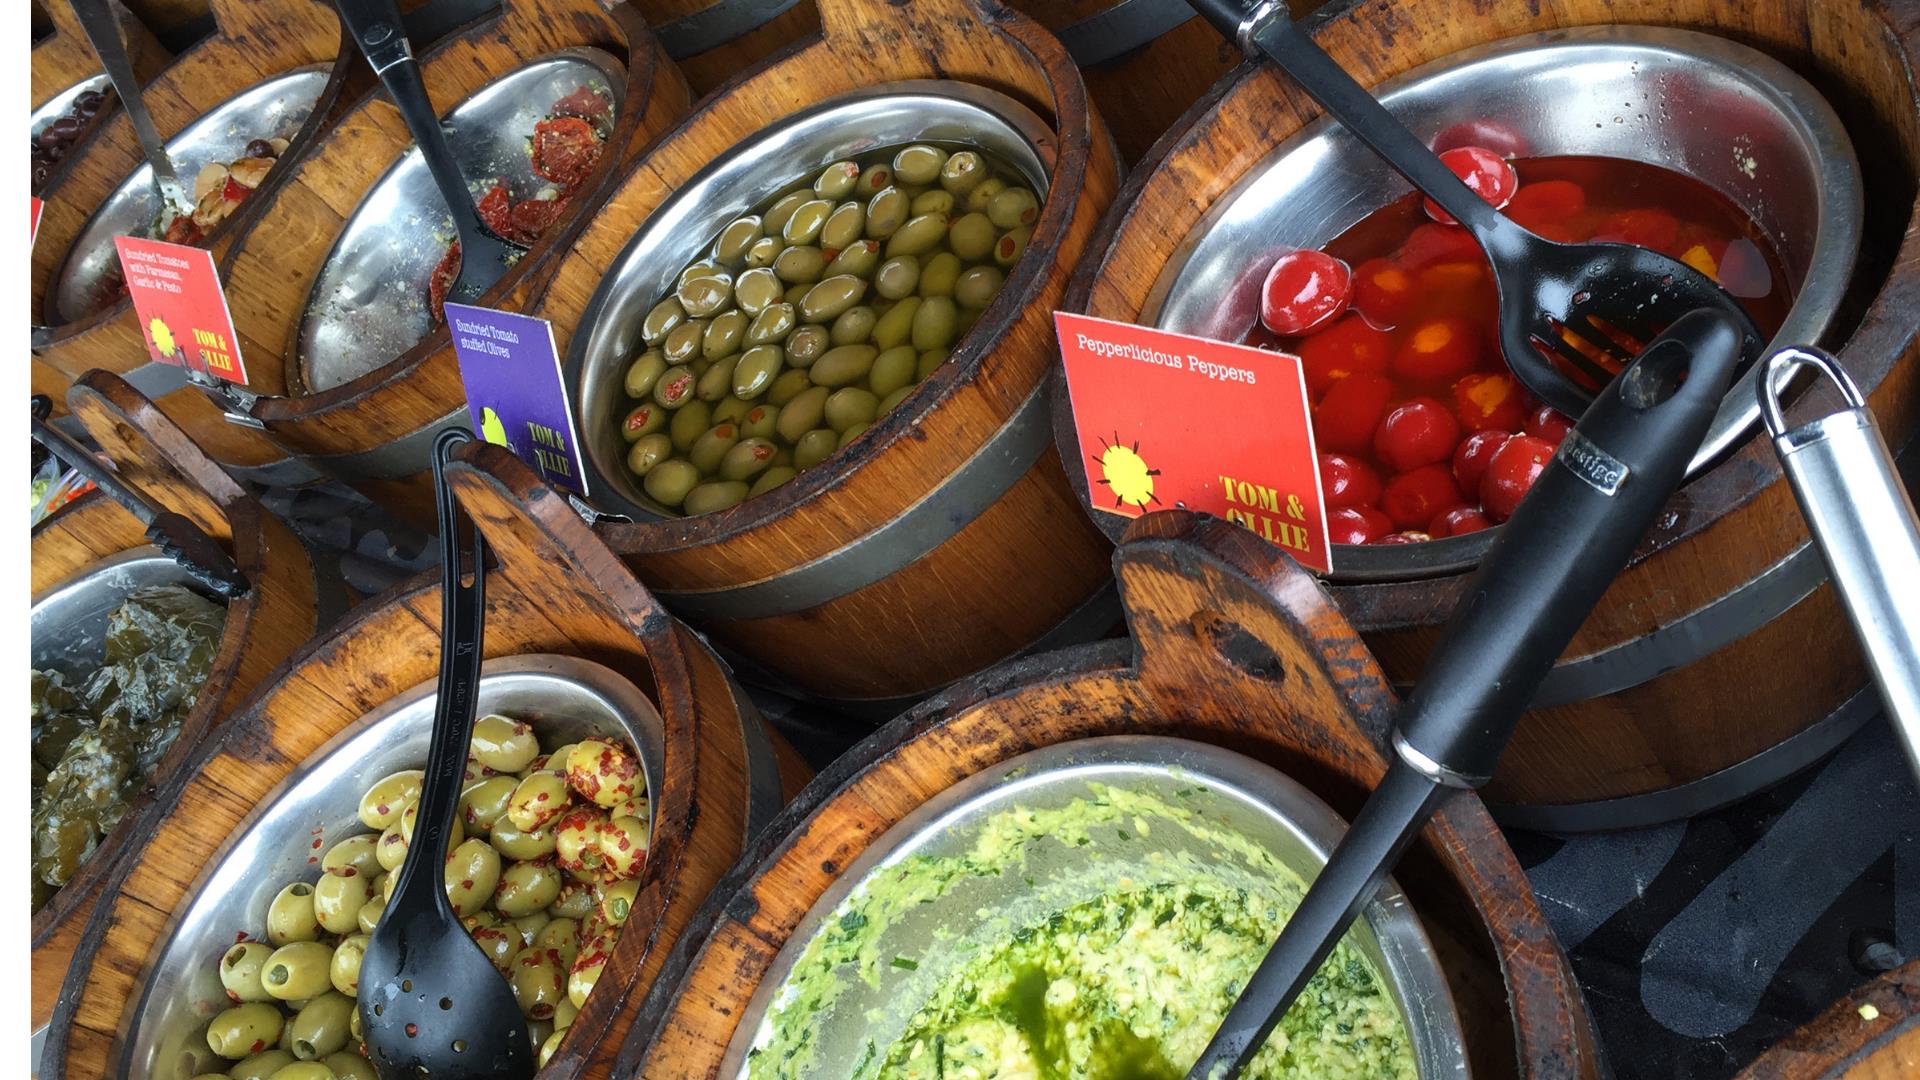 Image shows wooden barrels of different foods such as olives at the market